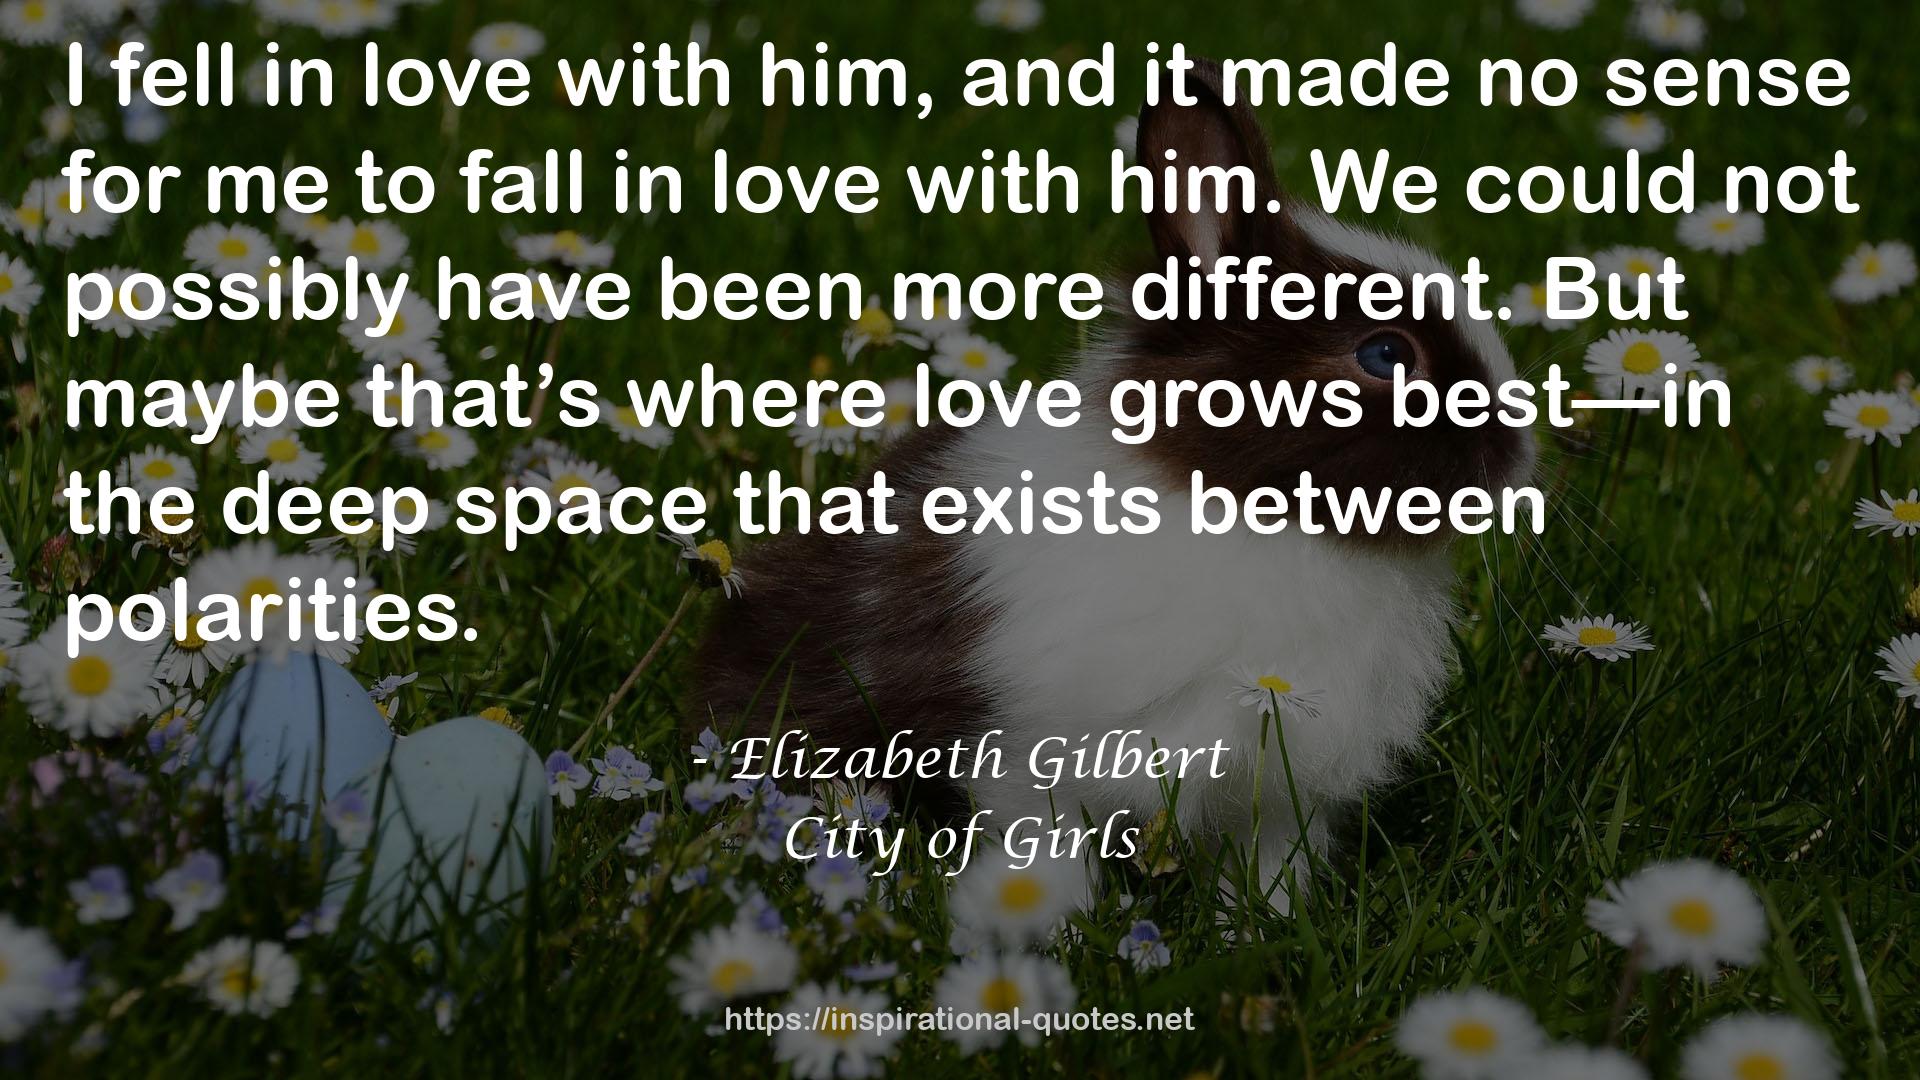 City of Girls QUOTES